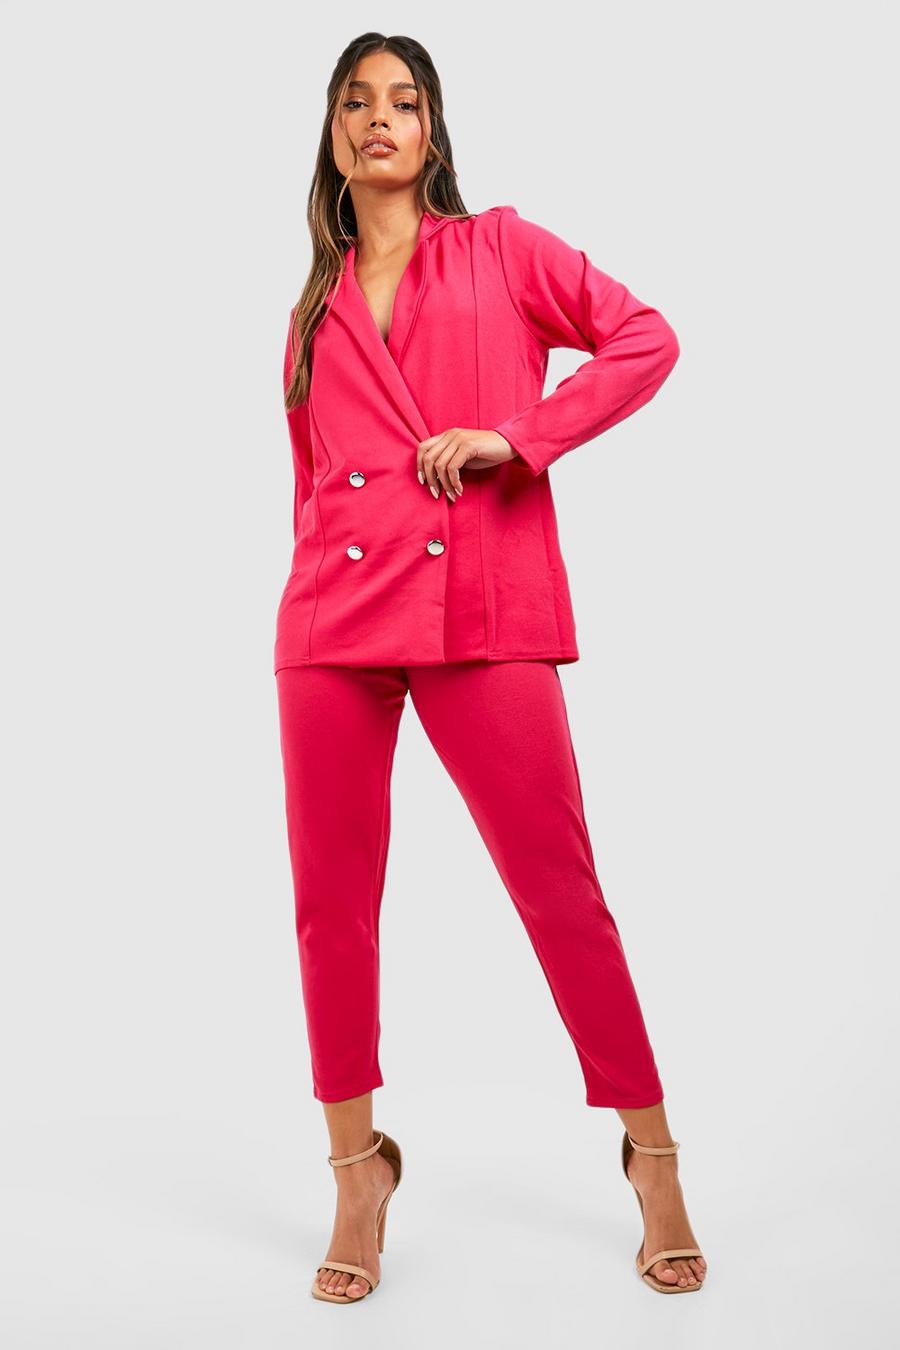 Hot pink Double Breasted Blazer And Pants Suit Set